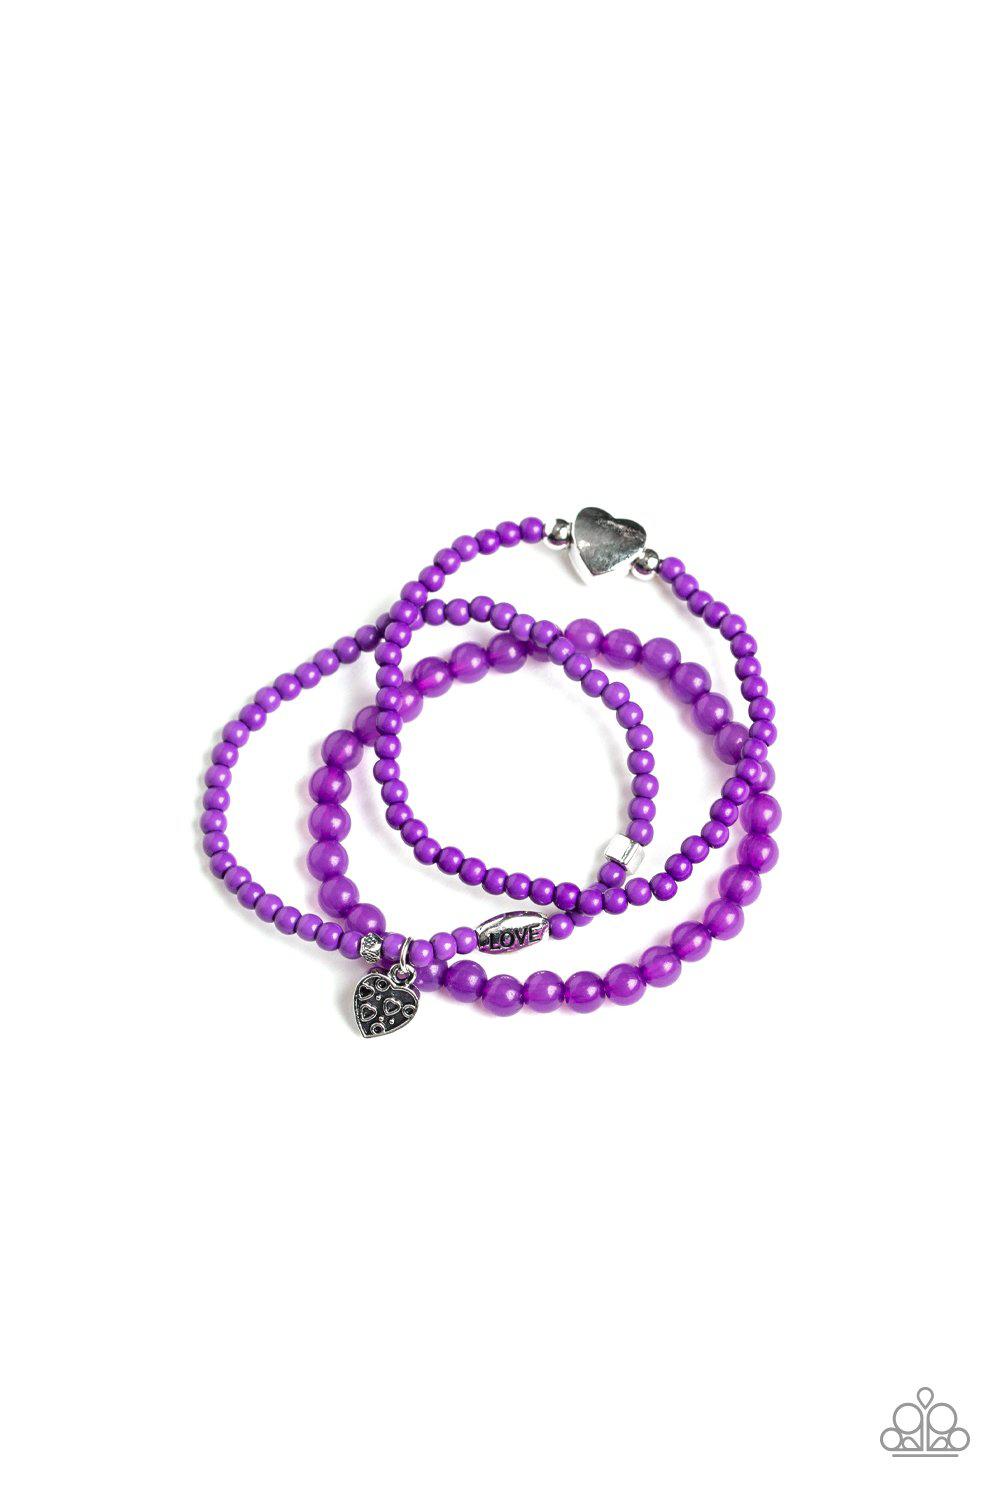 Really Romantic Purple and Silver Heart Stretch Bracelet Set - Paparazzi Accessories-CarasShop.com - $5 Jewelry by Cara Jewels